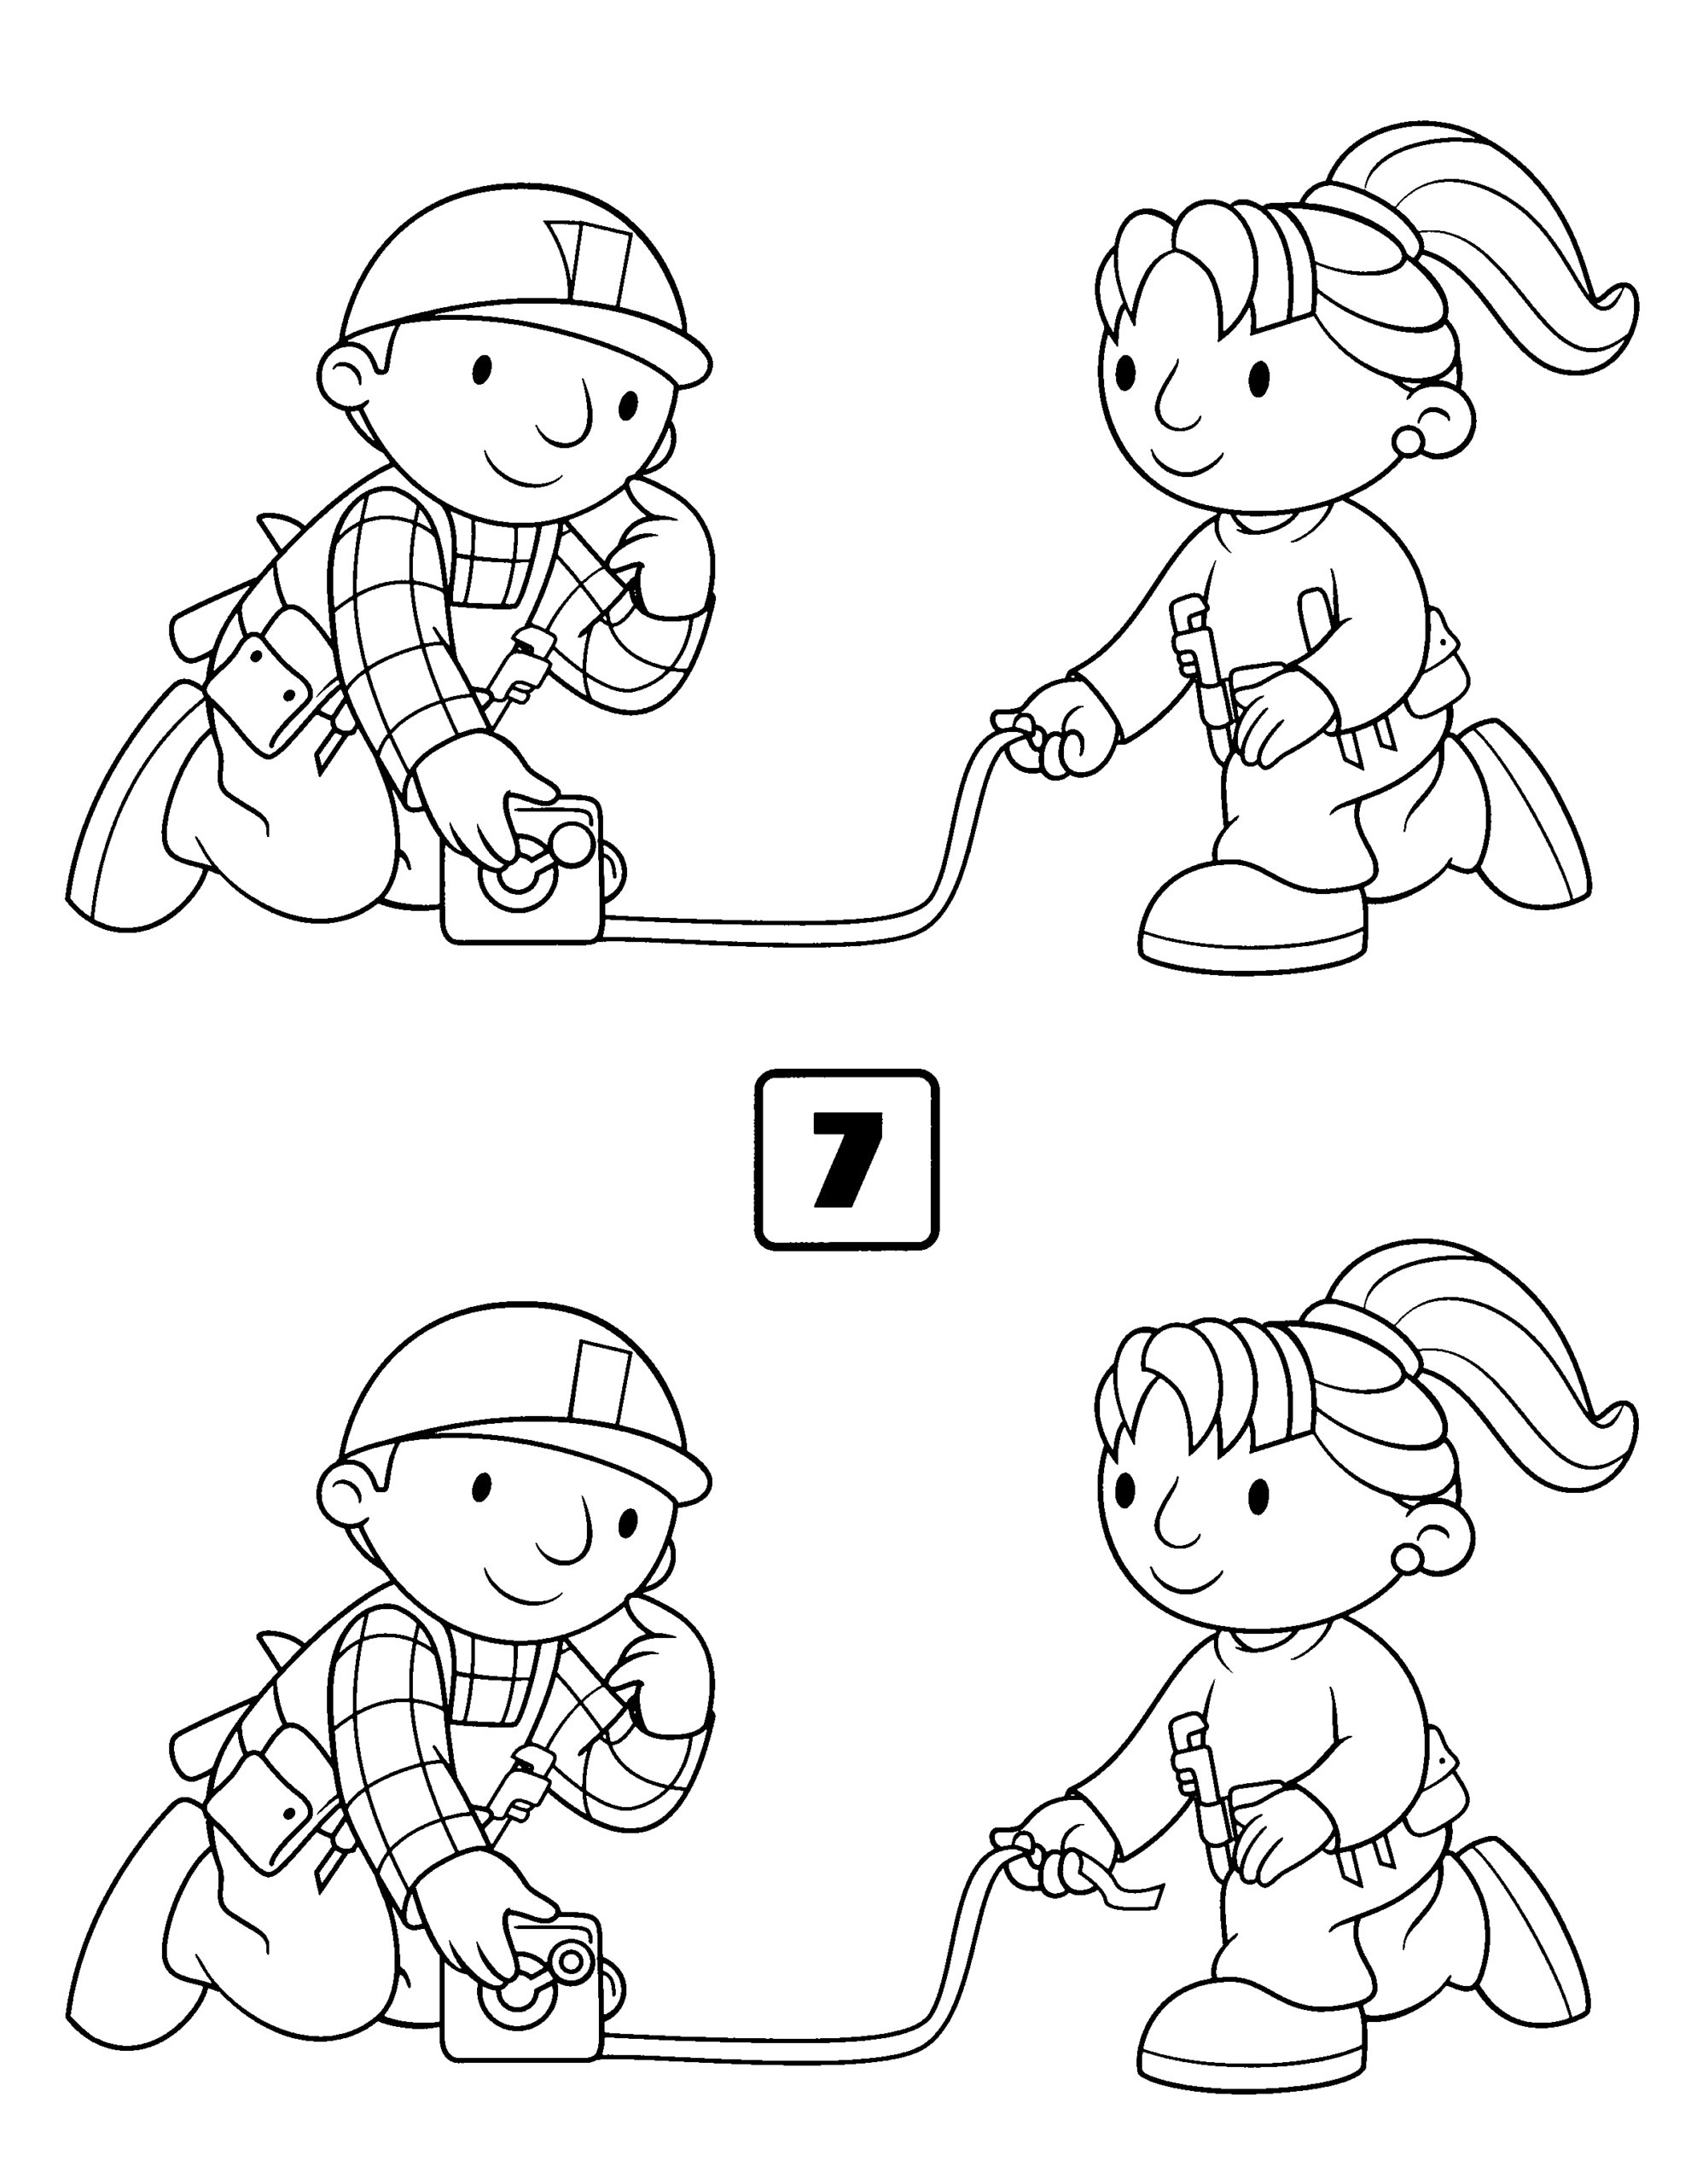 Bob the Builder Coloring Pages TV Film bob the builder 87 Printable 2020 01105 Coloring4free